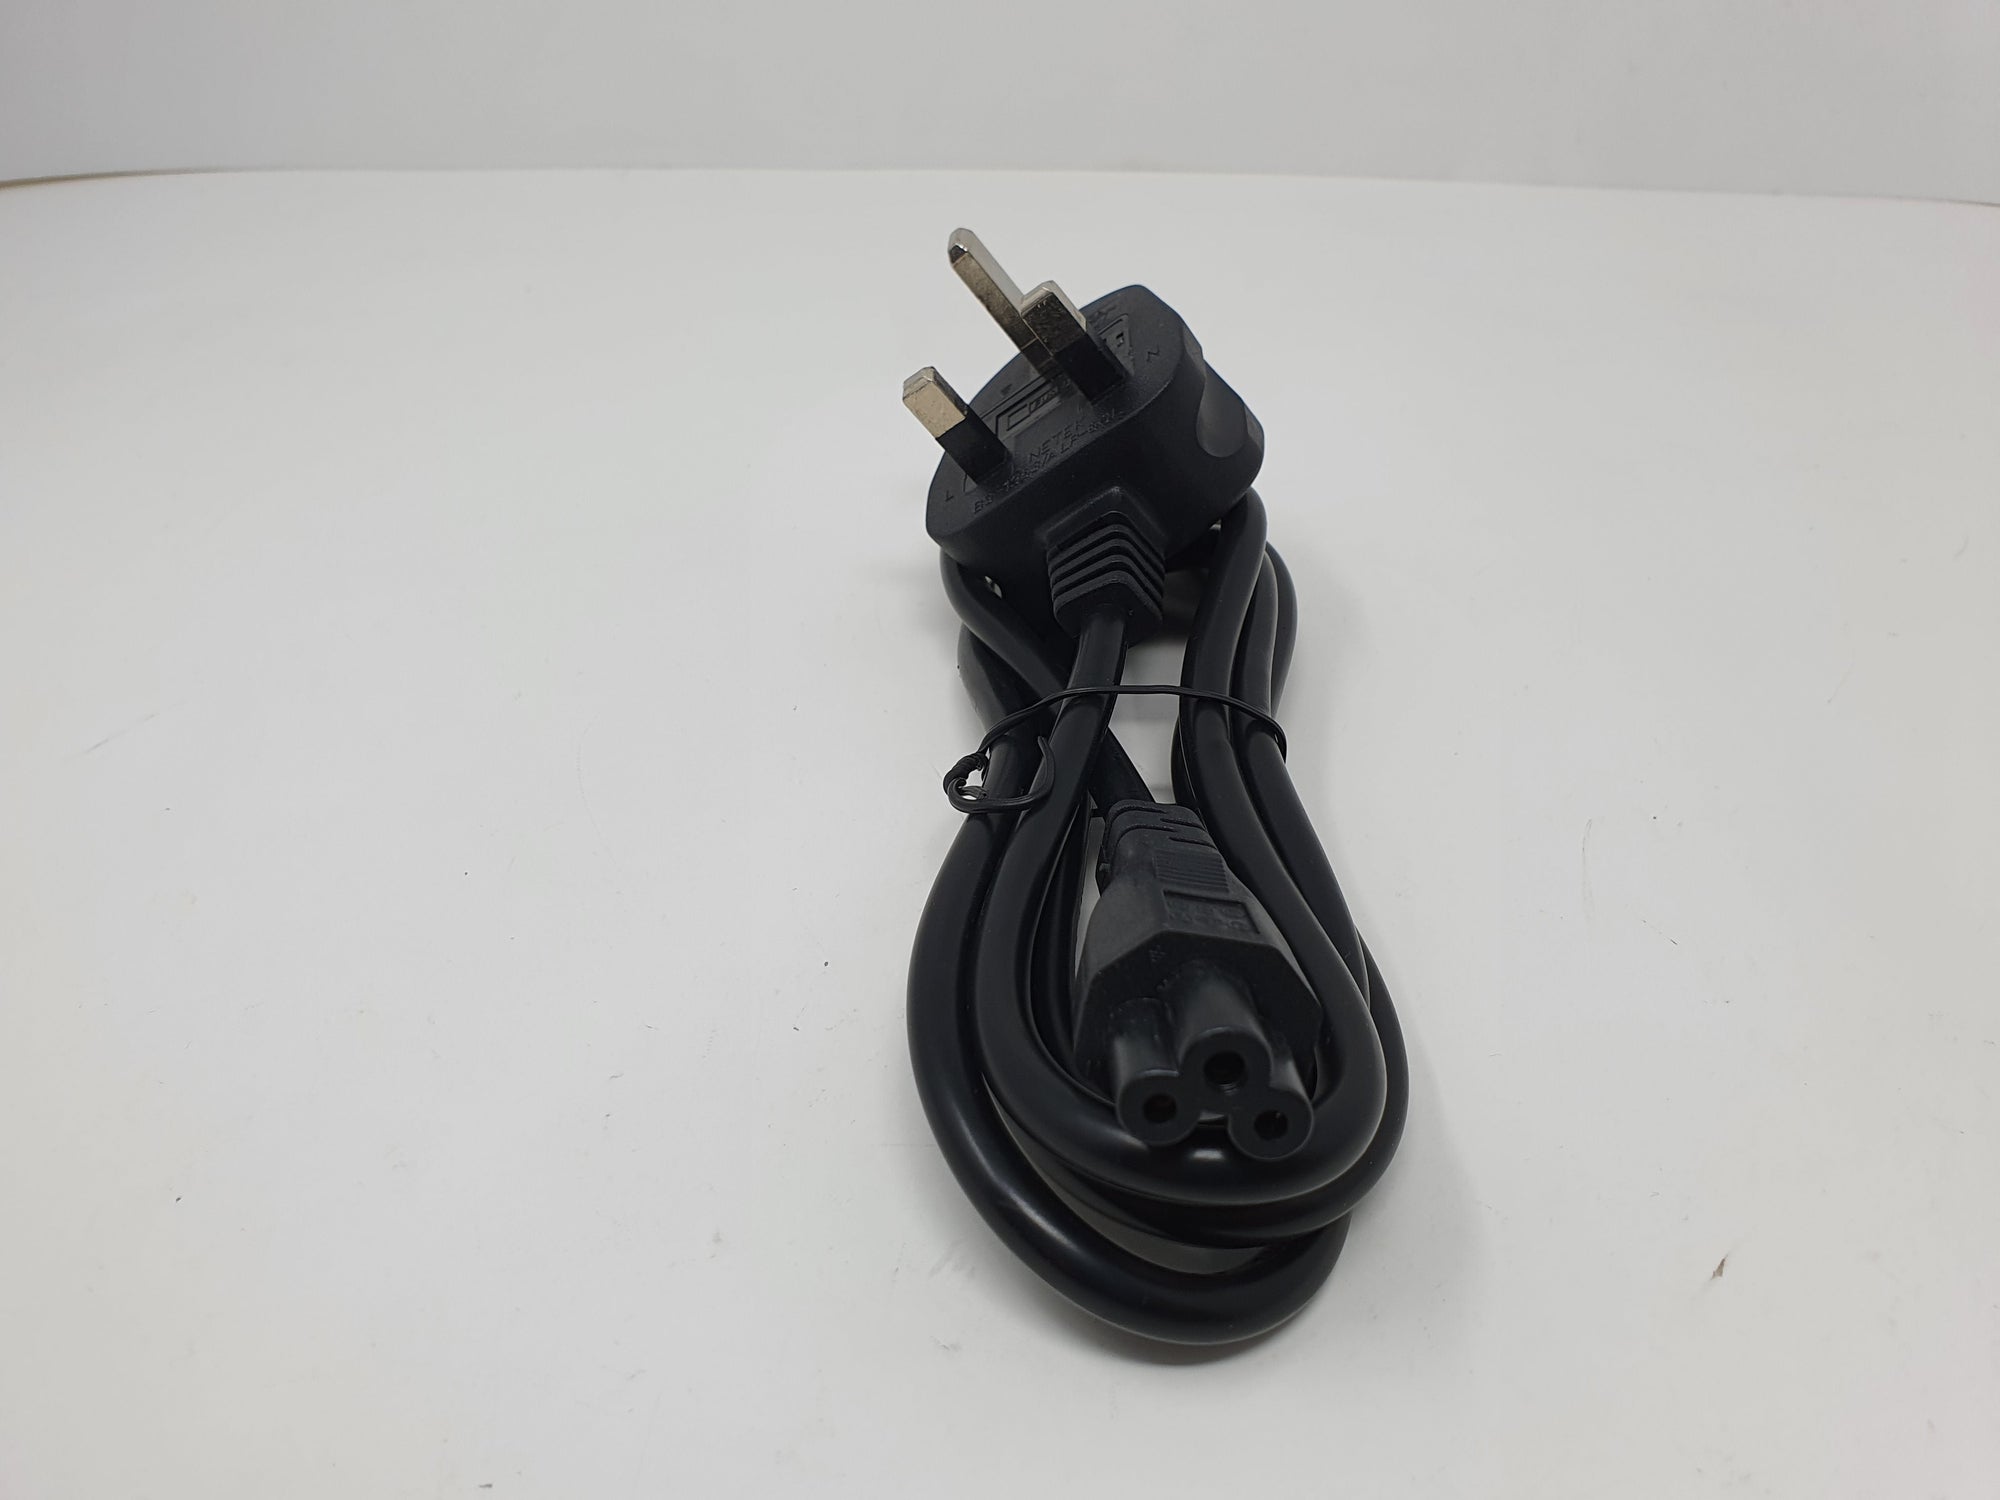 Mains Power Cable Power Lead Kettle lead IEC 1.8m 3 PIN UK PLUG for PC TV Monitor